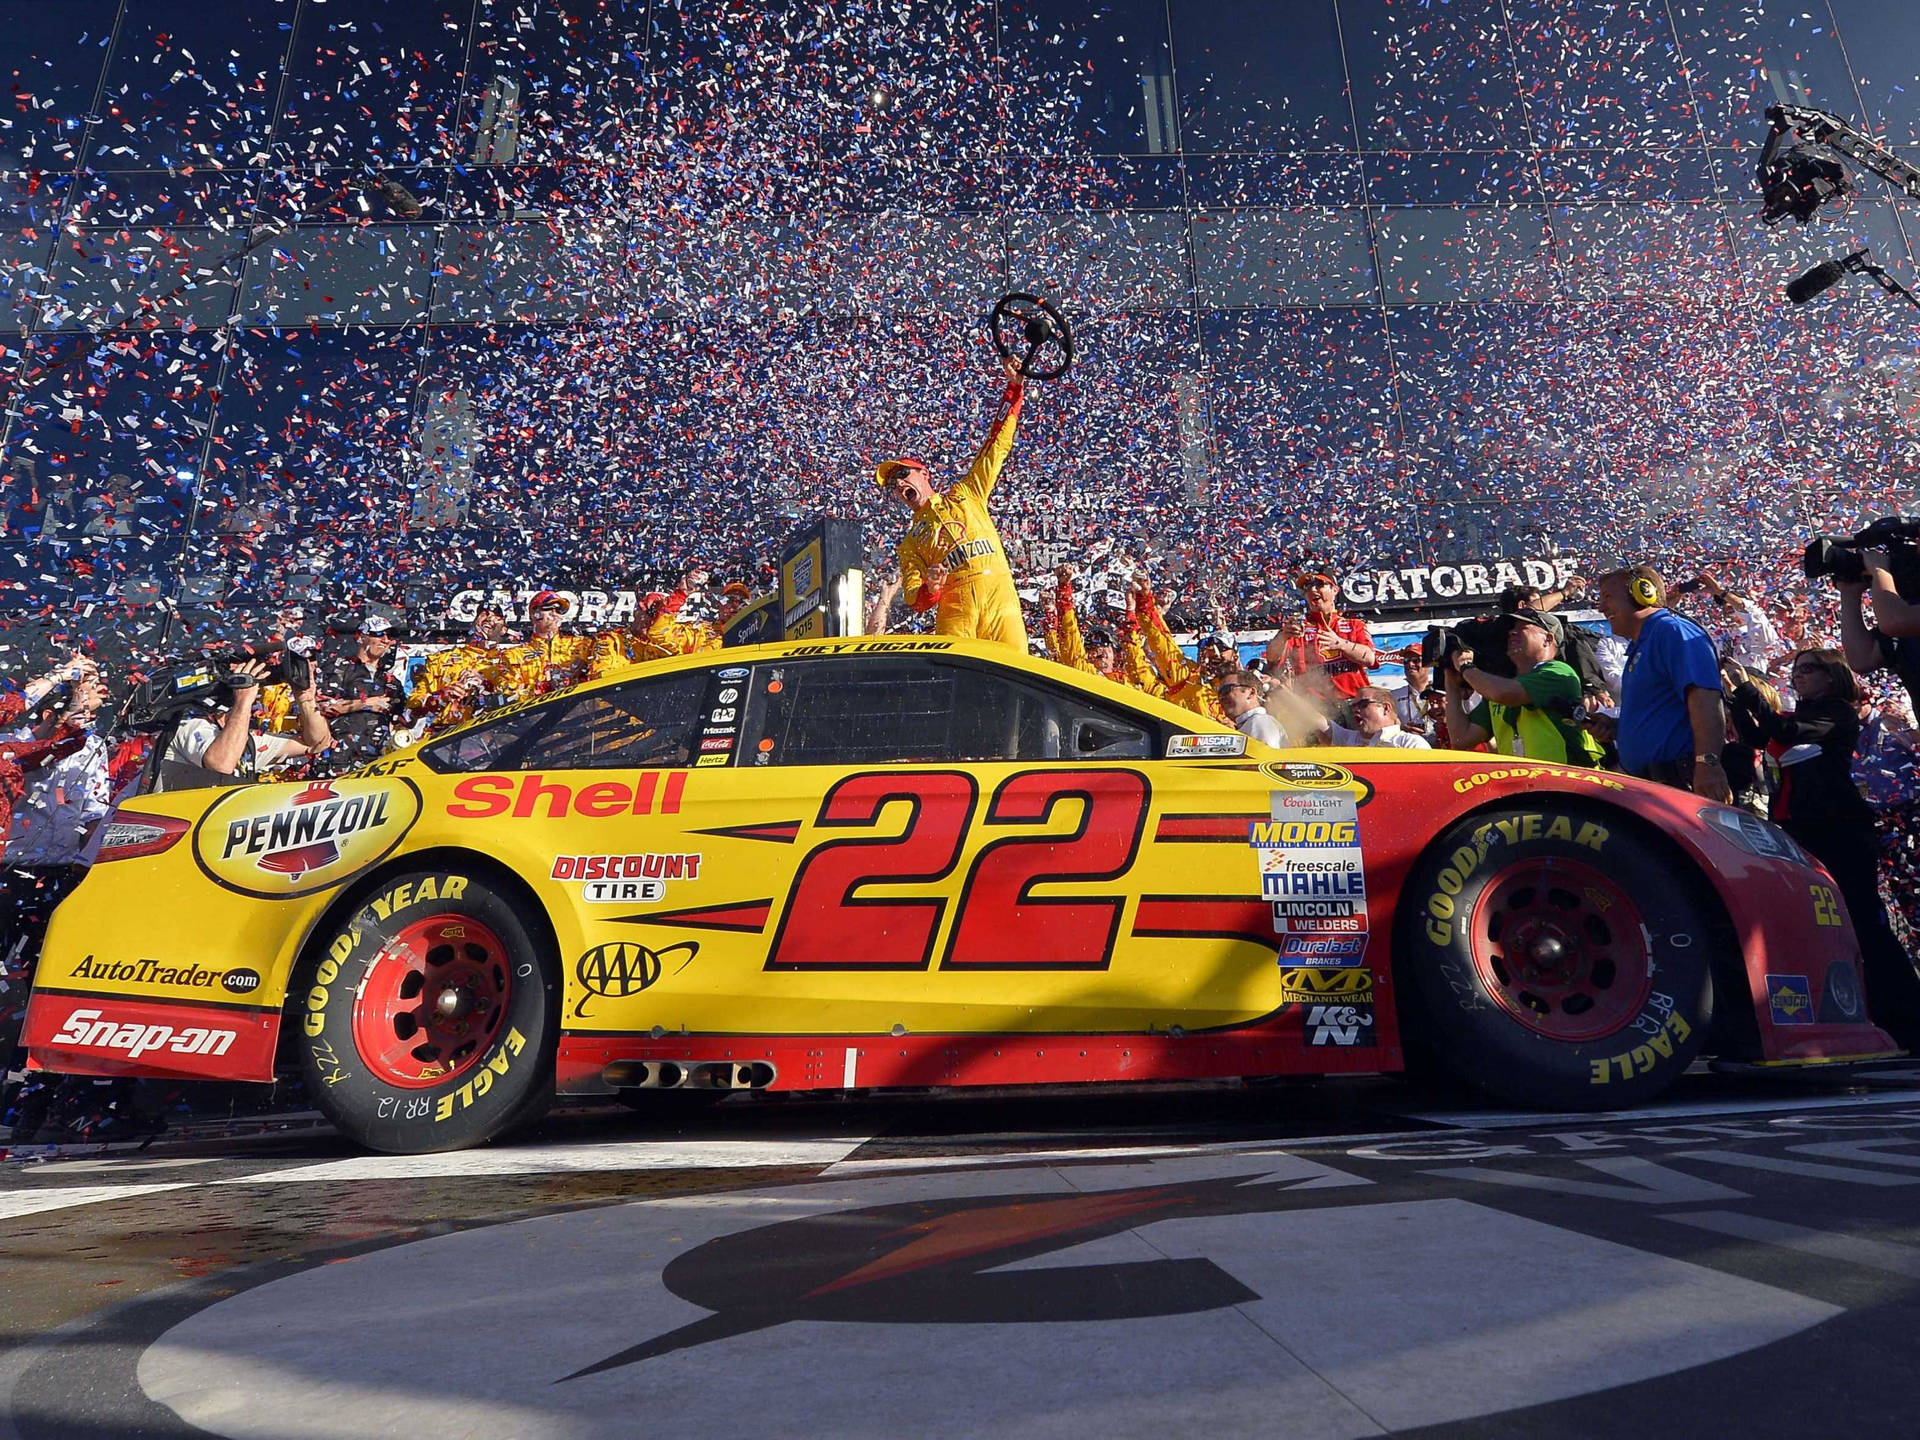 Joey Logano celebrating his victory with confetti at the race track Wallpaper